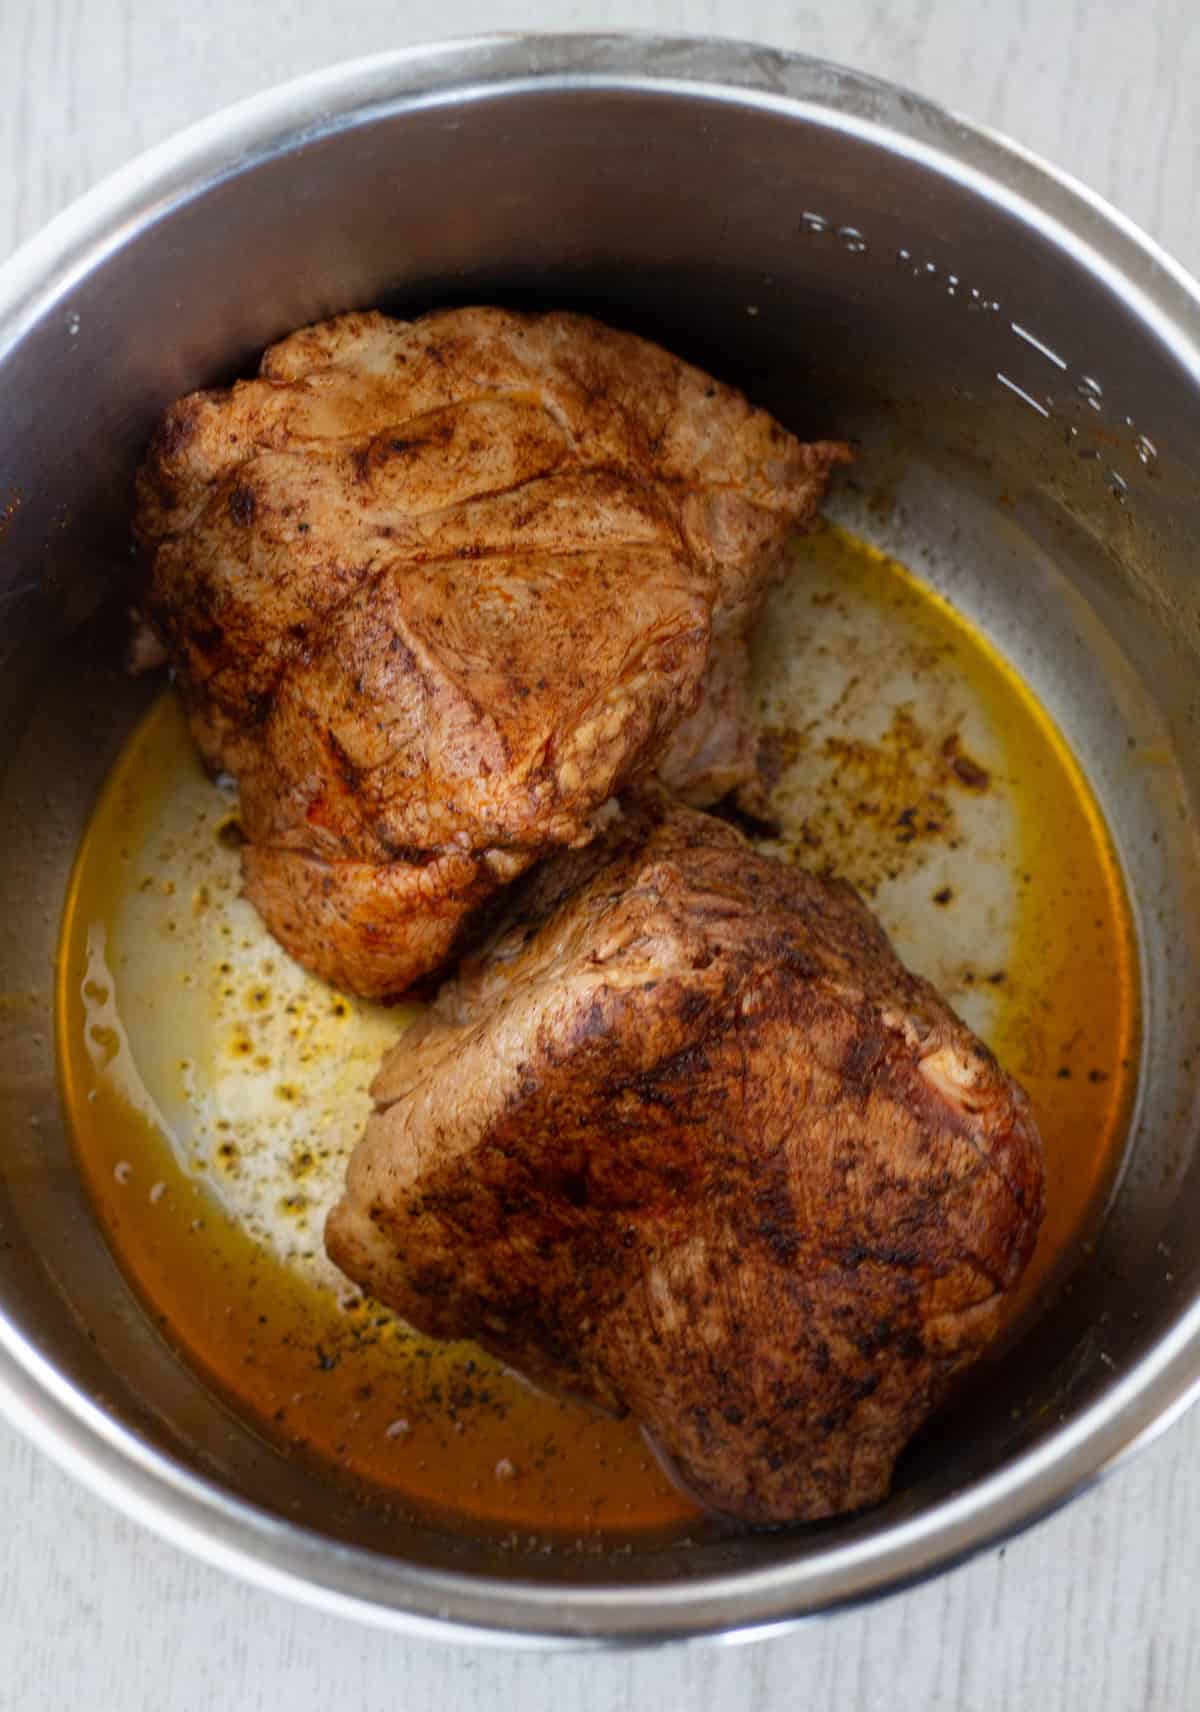 Browning 2 pieces of pork roast in the instant pot